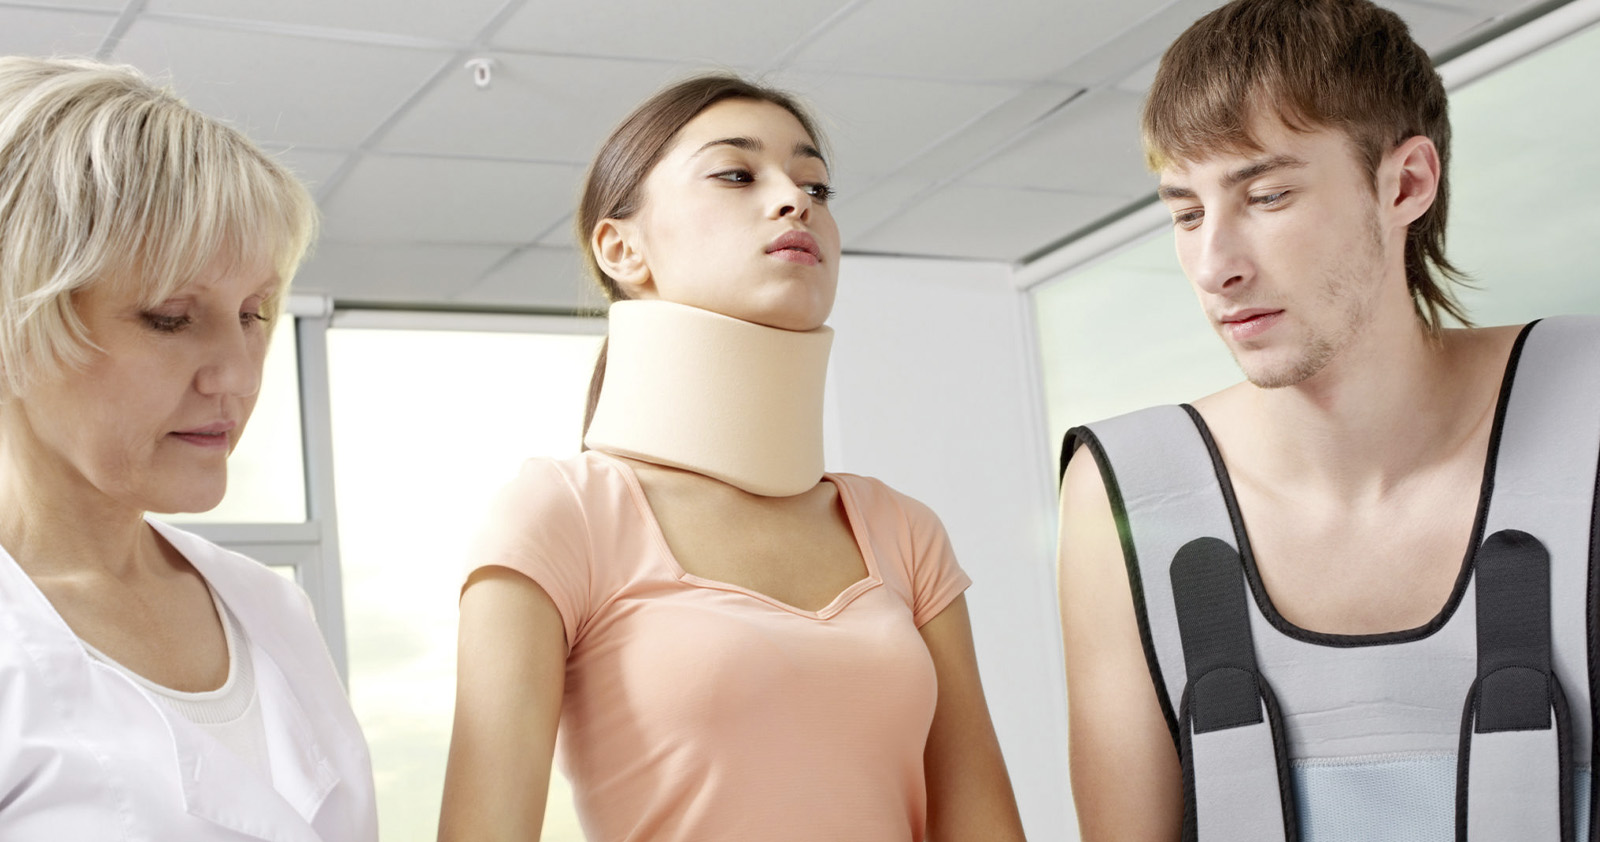 Girl in a neck brace receiving medical care